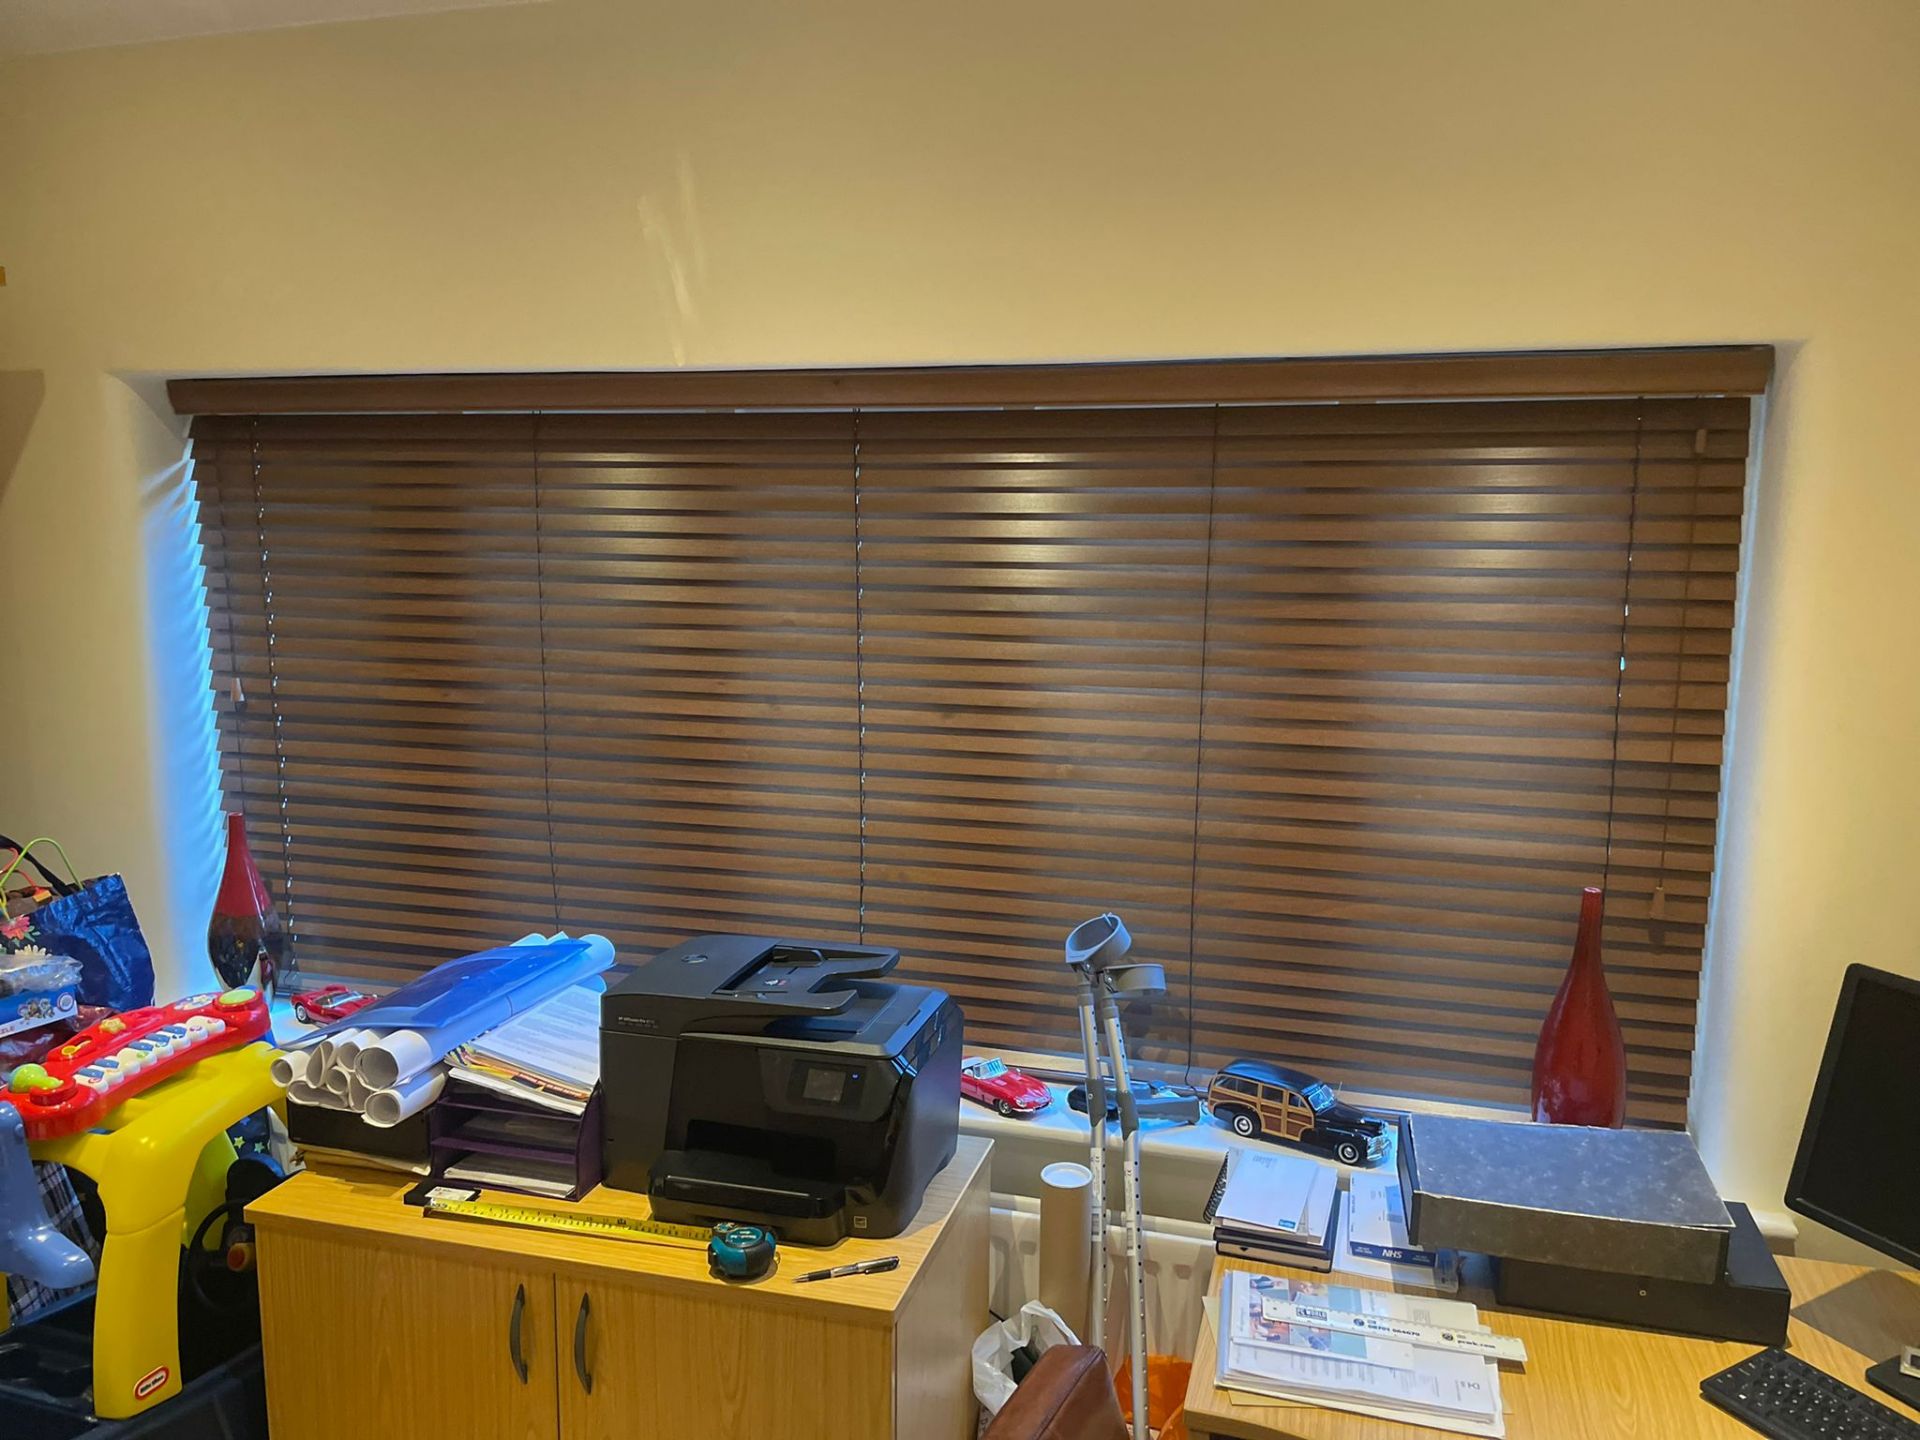 1 x Set Of Wooden Slatted Blinds - Dimensions: 126(h) x 280(w) cm - Exclusive Property In Hale Barns - Image 4 of 4